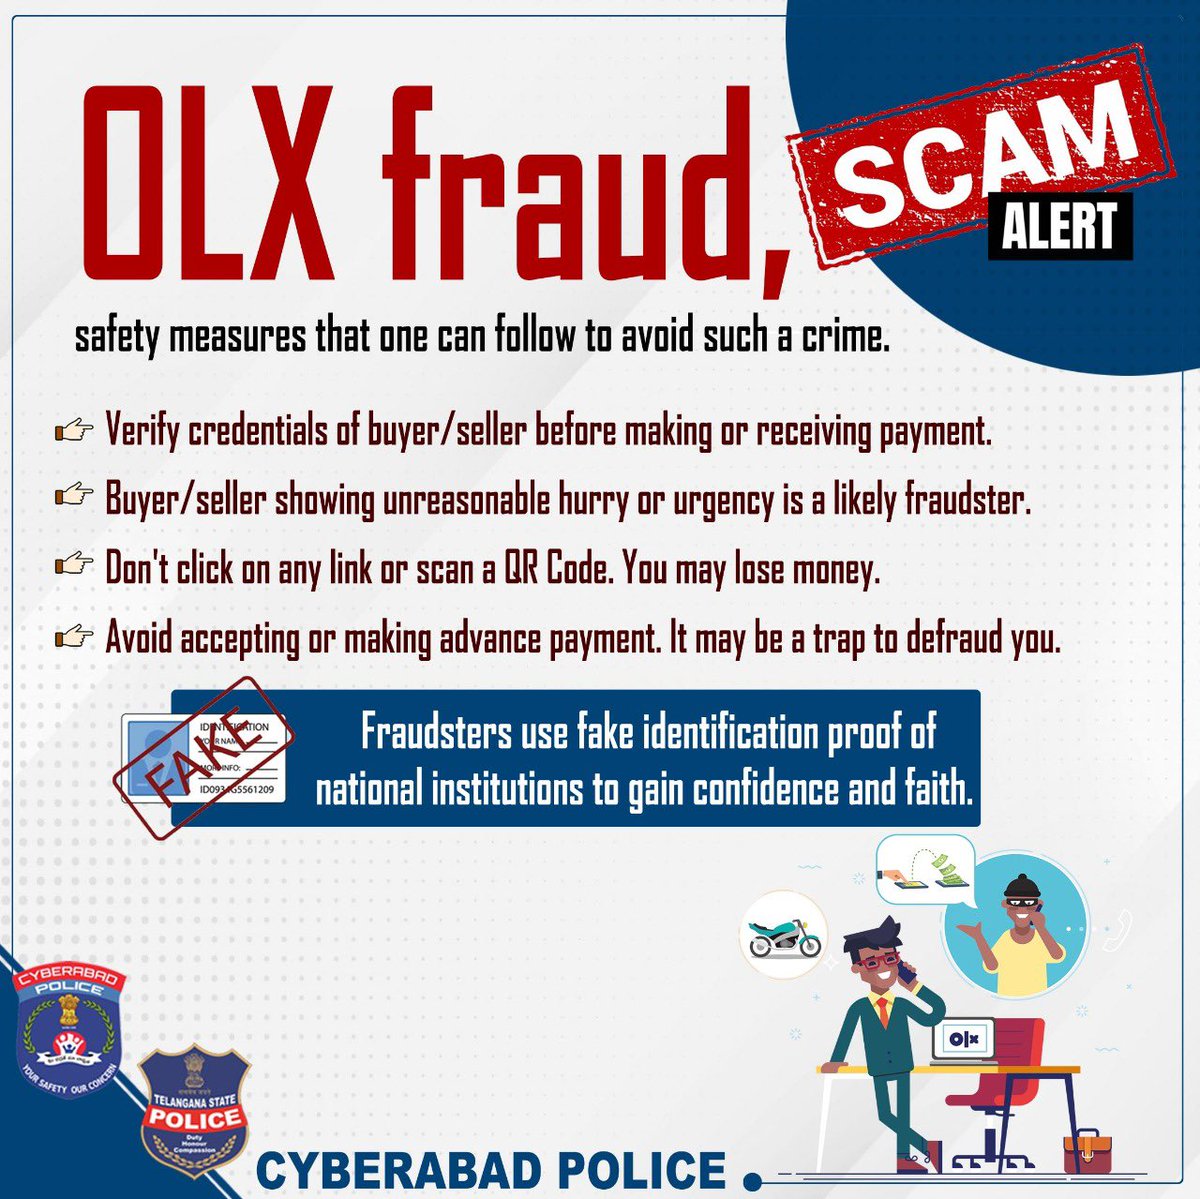 Beware of these cyber crimes and such attempts.  #CyberFrauds #OnlineFraud #OLXfrauds #CyberabadPolice